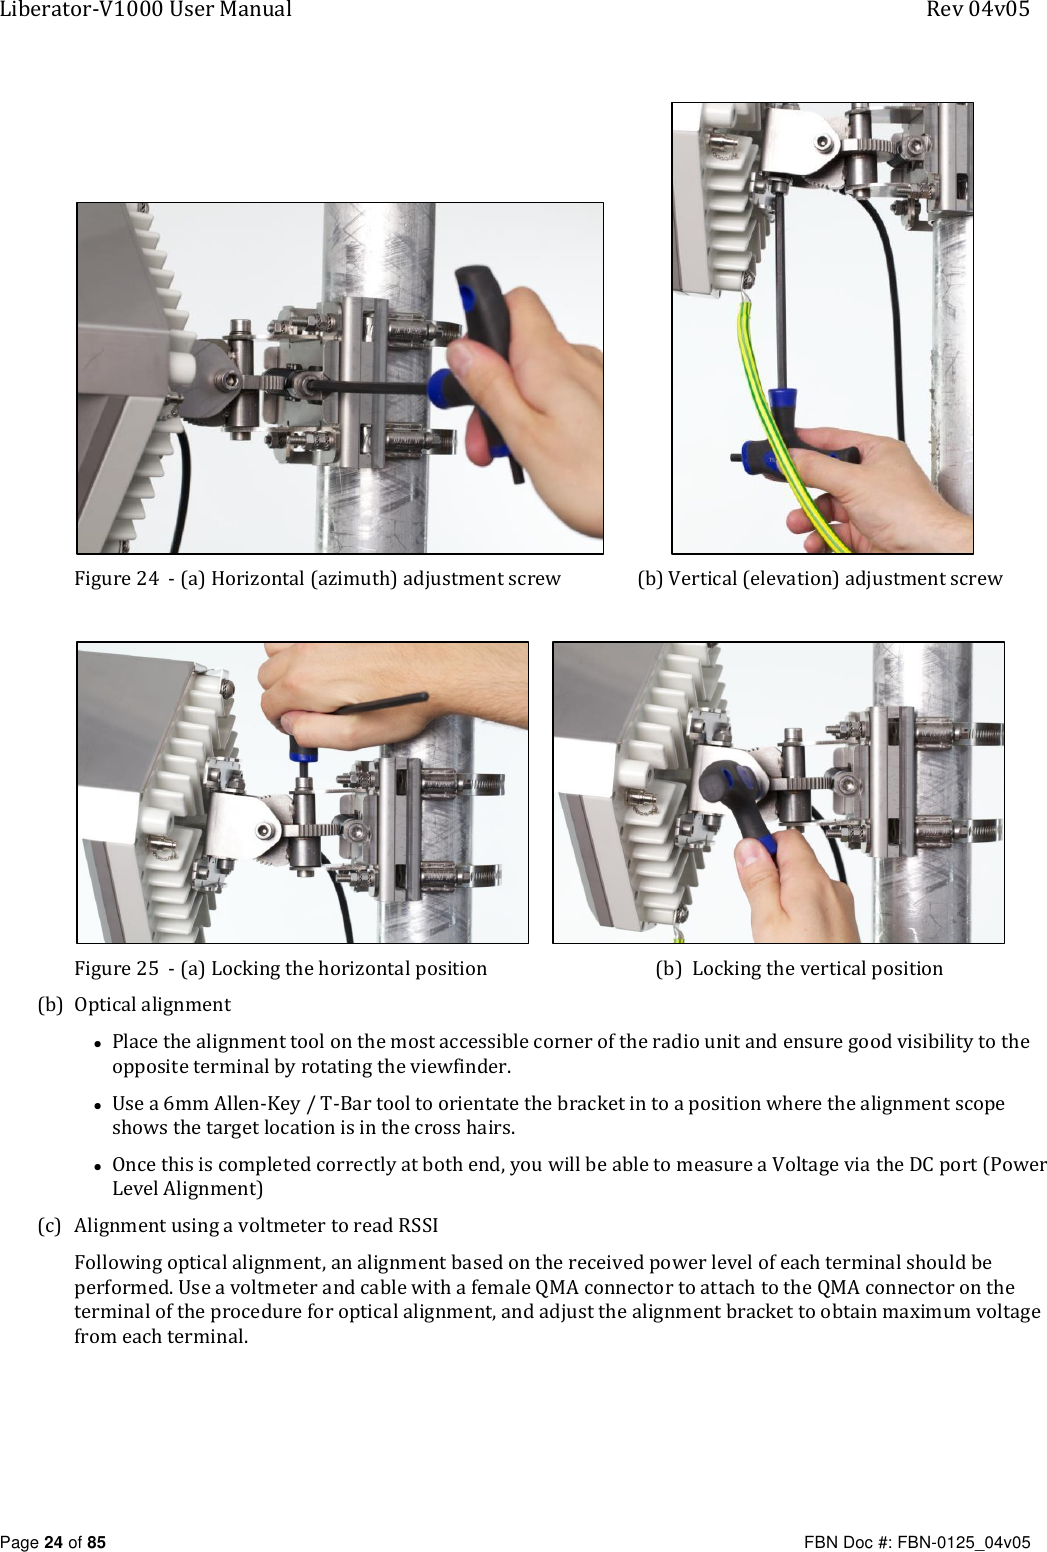 Liberator-V1000 User Manual  Rev 04v05     Page 24 of 85   FBN Doc #: FBN-0125_04v05                Figure 24  - (a) Horizontal (azimuth) adjustment screw  (b) Vertical (elevation) adjustment screw         Figure 25  - (a) Locking the horizontal position  (b)  Locking the vertical position (b) Optical alignment • Place the alignment tool on the most accessible corner of the radio unit and ensure good visibility to the opposite terminal by rotating the viewfinder. • Use a 6mm Allen-Key / T-Bar tool to orientate the bracket in to a position where the alignment scope shows the target location is in the cross hairs.  • Once this is completed correctly at both end, you will be able to measure a Voltage via the DC port (Power Level Alignment) (c) Alignment using a voltmeter to read RSSI Following optical alignment, an alignment based on the received power level of each terminal should be performed. Use a voltmeter and cable with a female QMA connector to attach to the QMA connector on the terminal of the procedure for optical alignment, and adjust the alignment bracket to obtain maximum voltage from each terminal. 